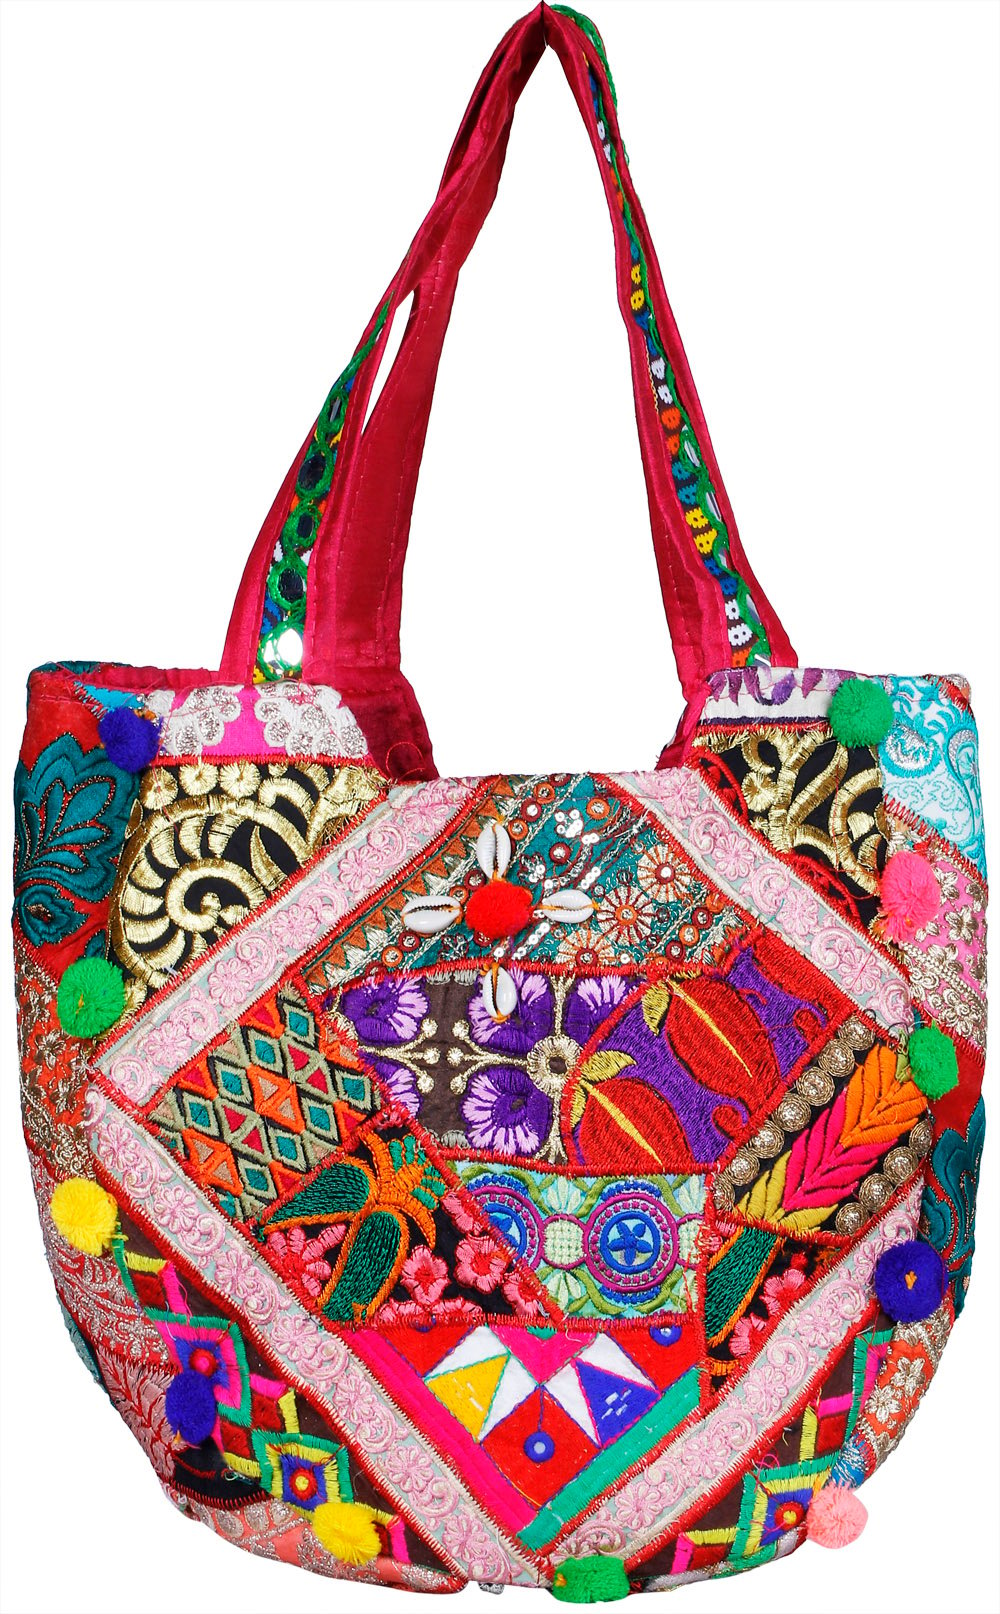 Multicolored Shopper Bag from Kutch with Floral Embroidery and Sea-Shells